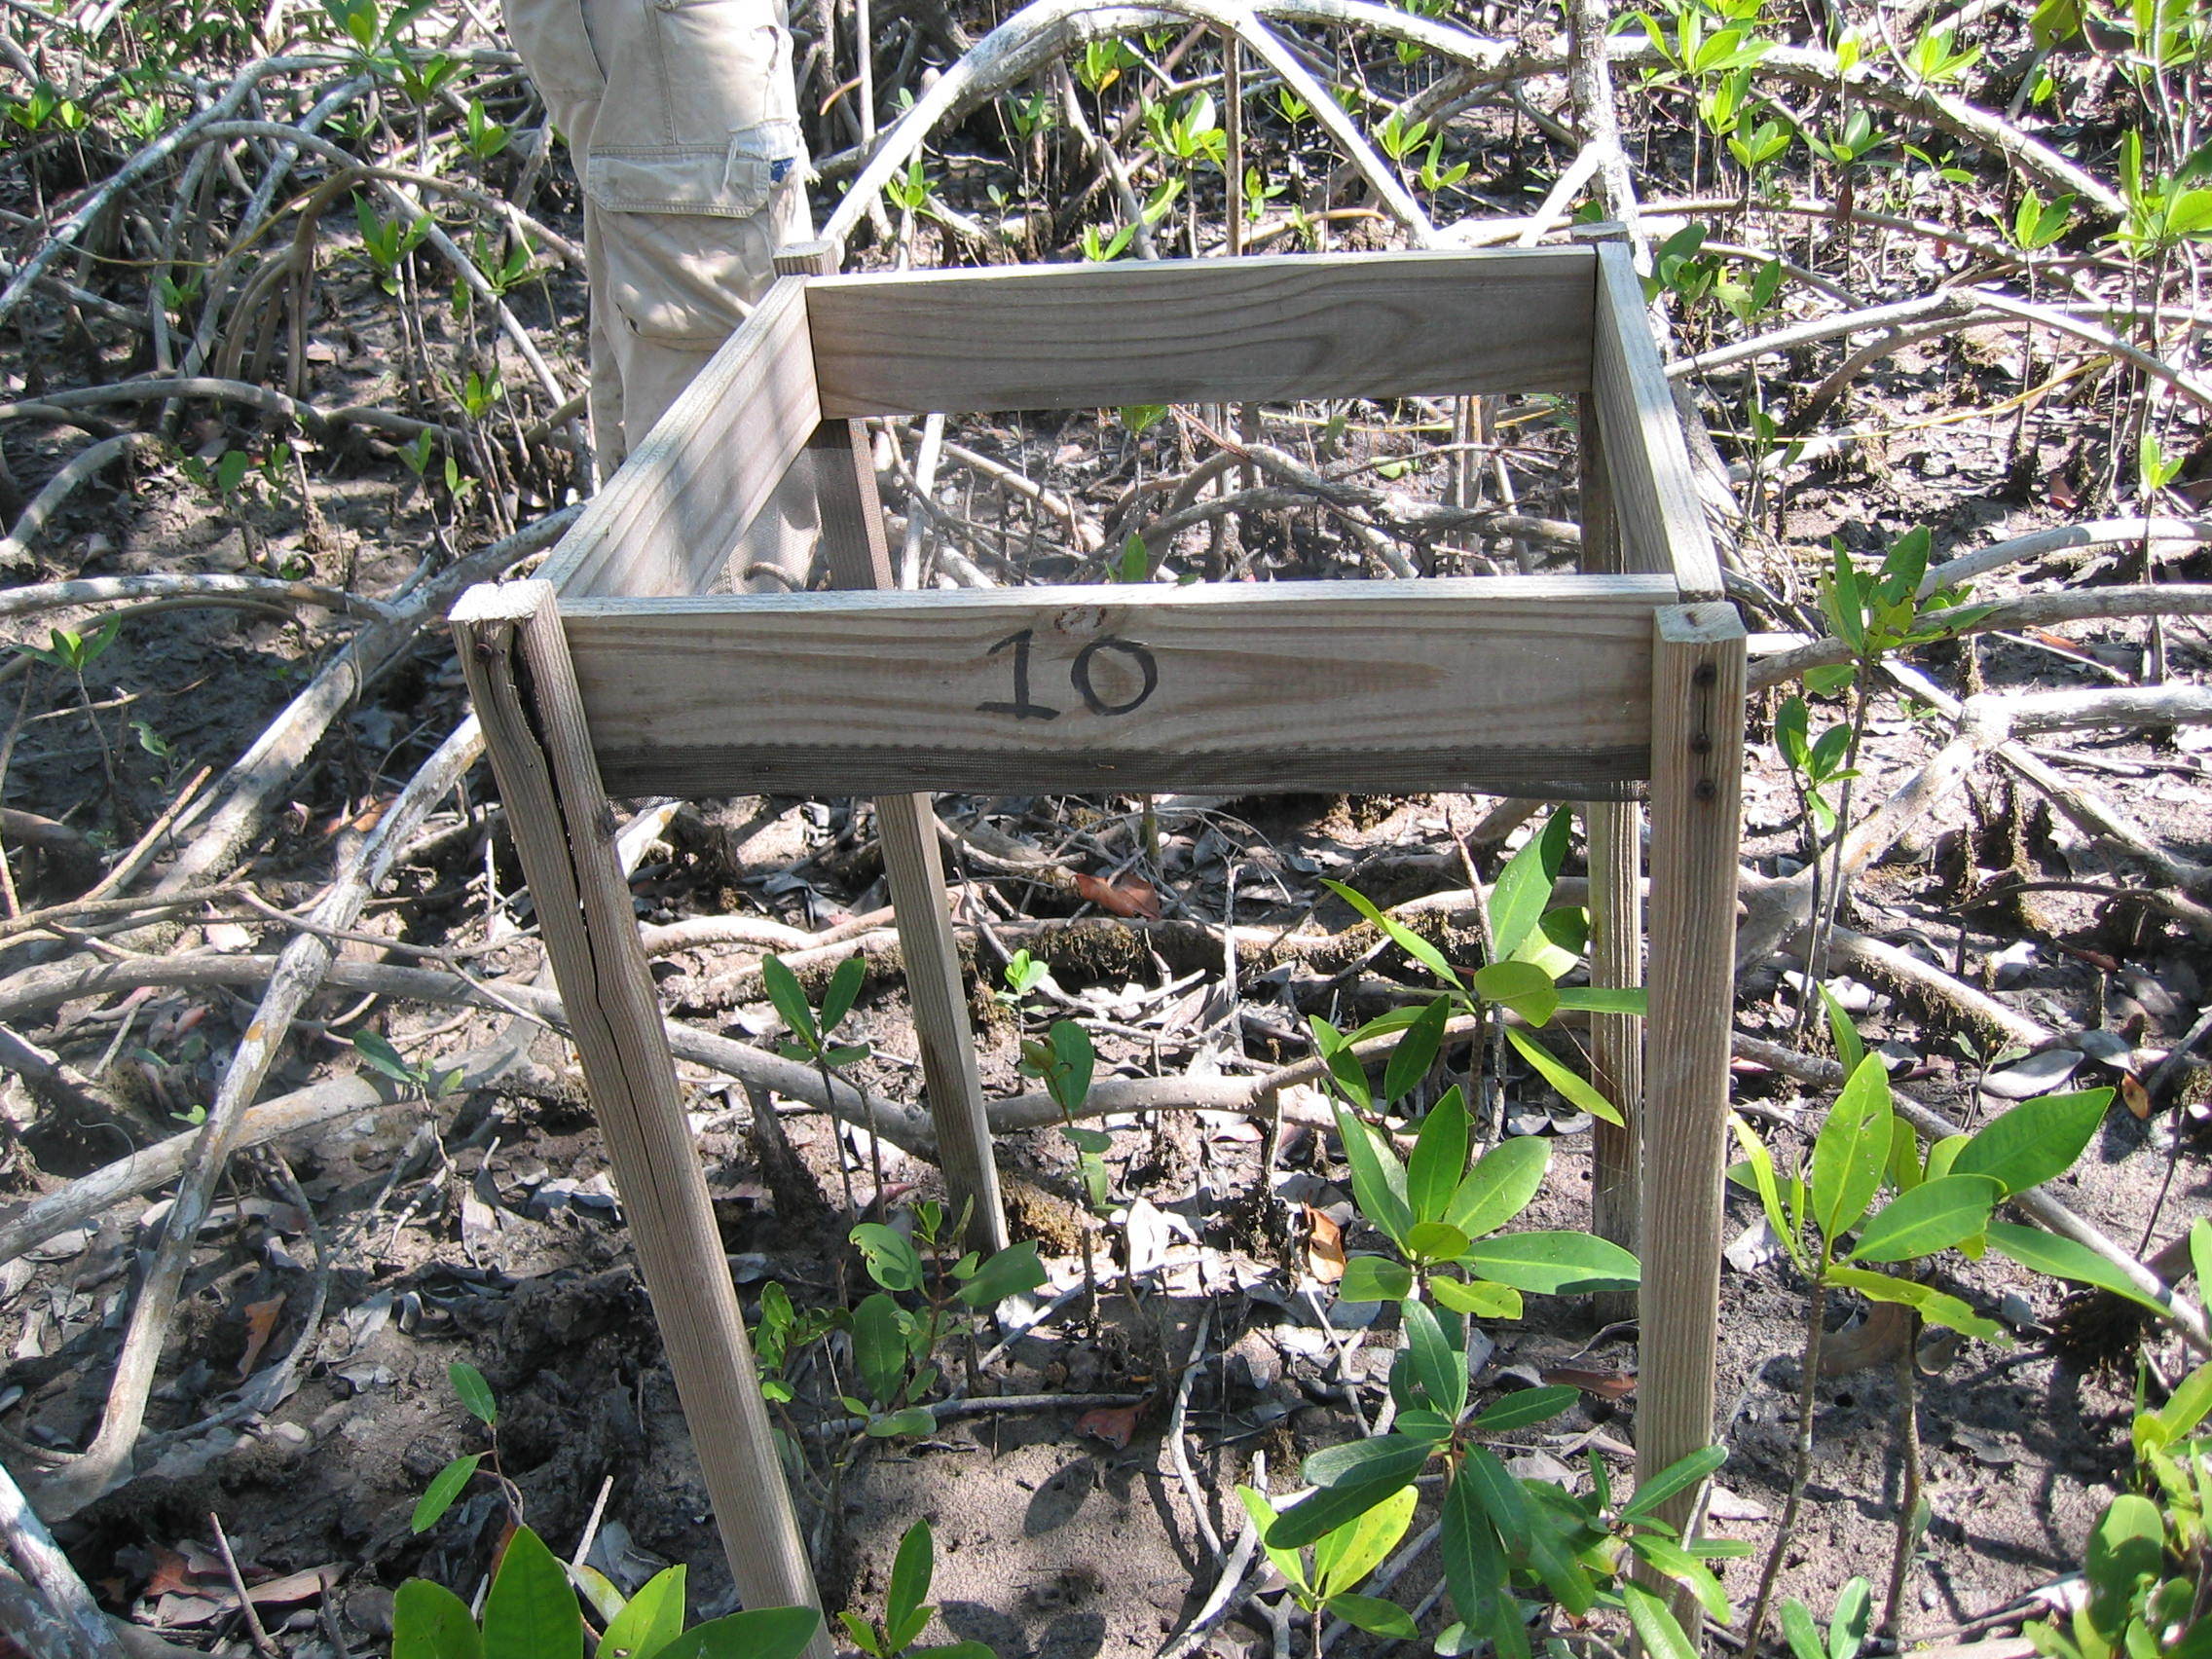 Litter basket installed in a mangrove forest at SRS-5 in Shark River to estimate litterfall productivity